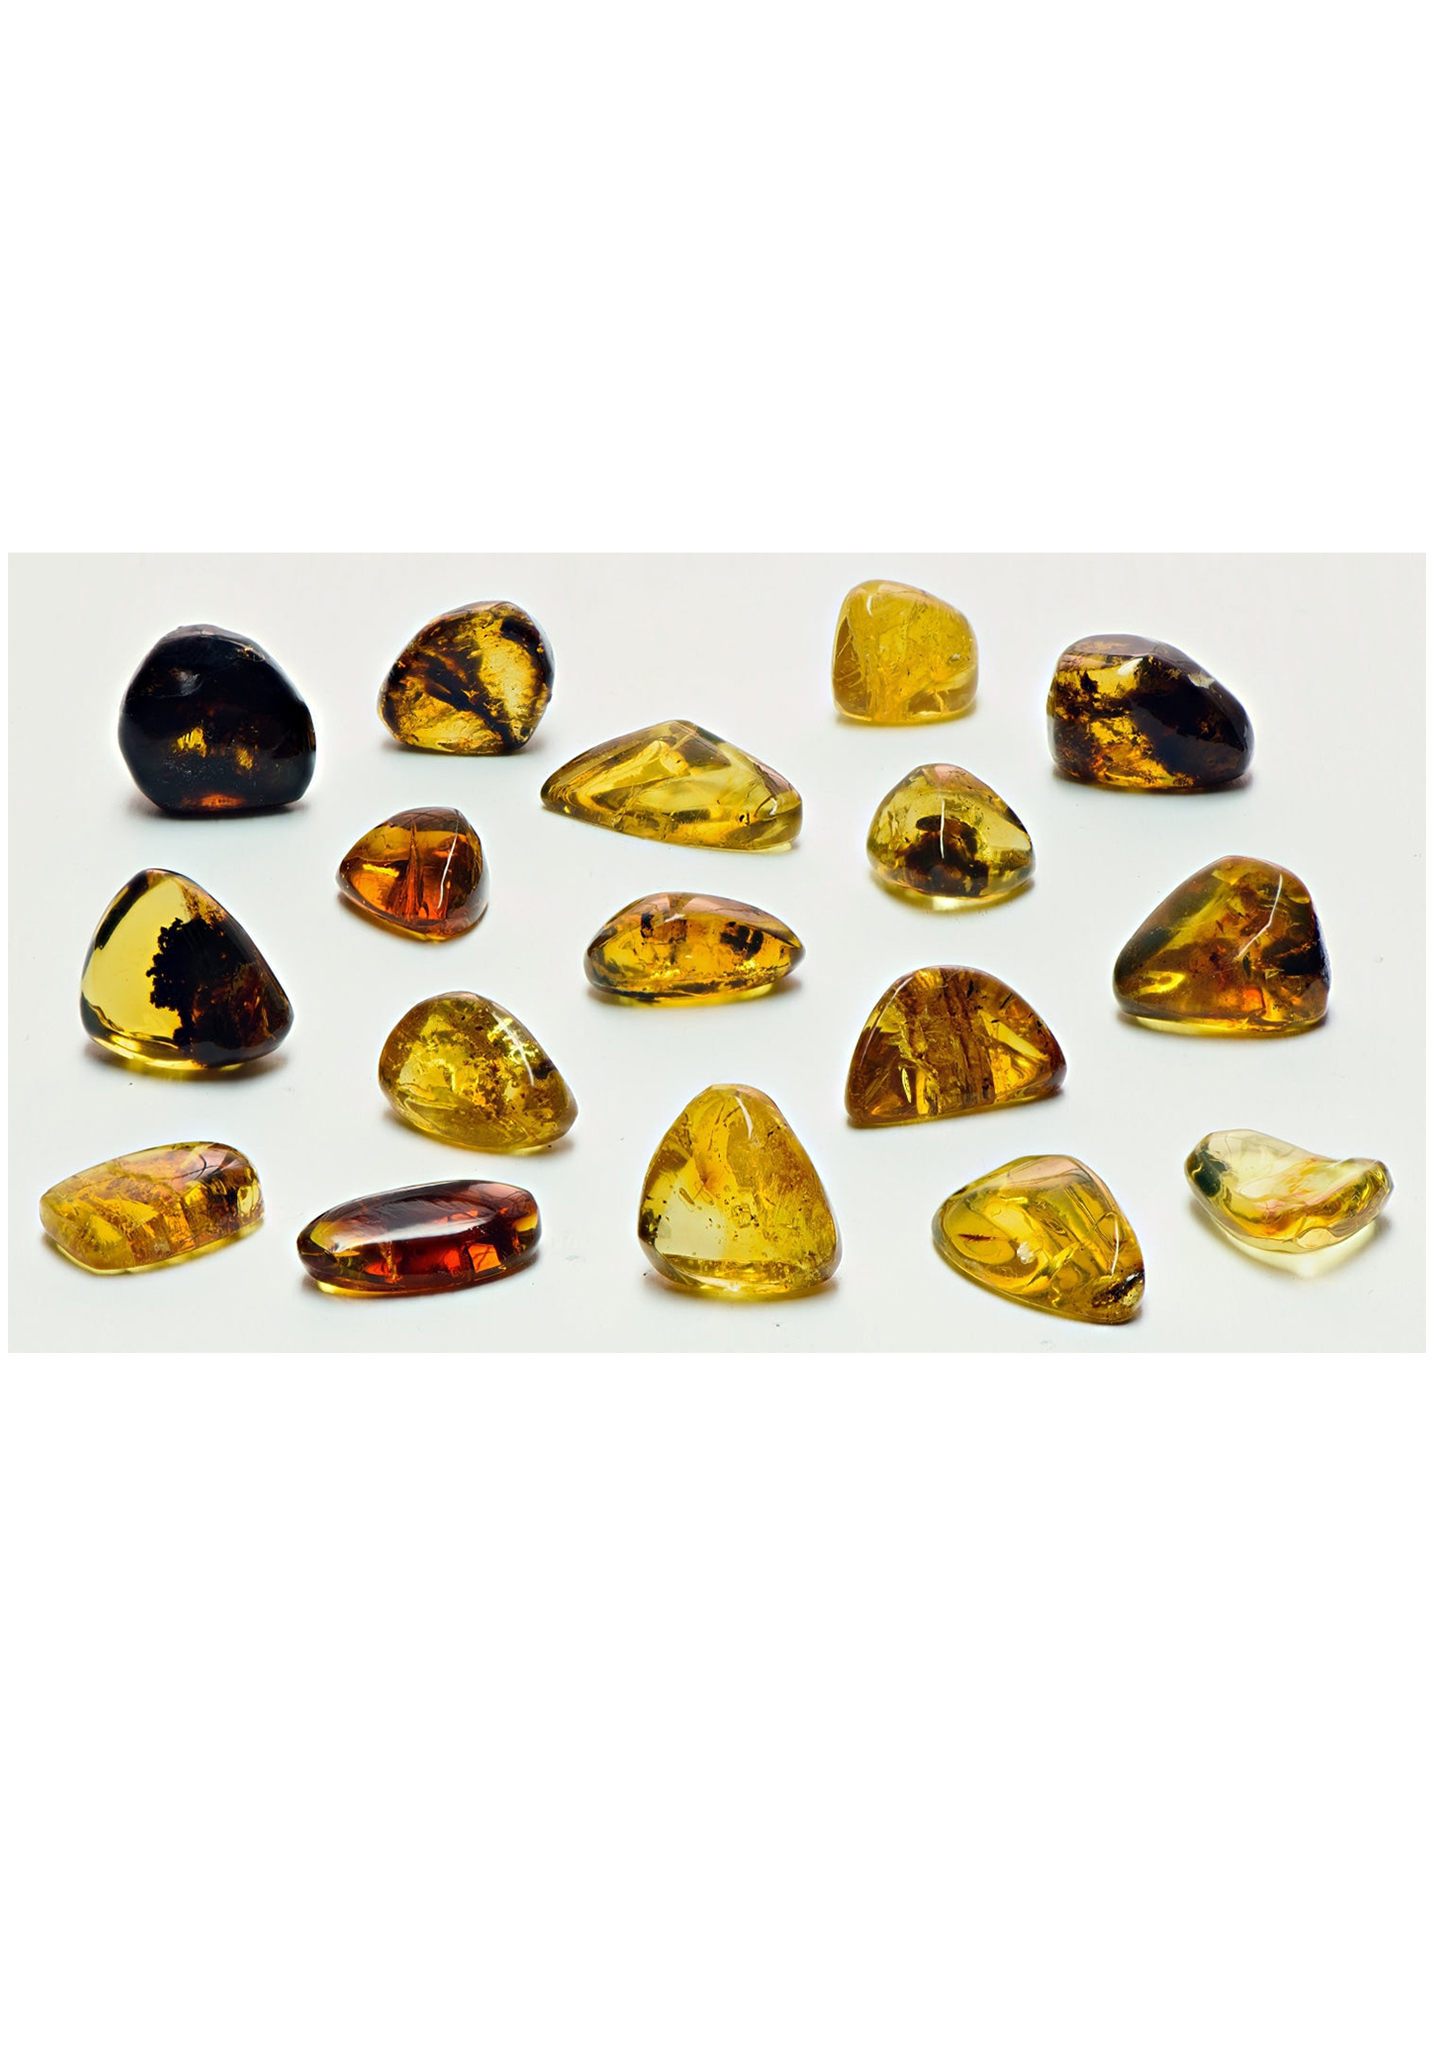 Amber - Natural Fossilized Tree Sap - Tumbled Freeform Gemstone - Small [ 0.4&quot; - 1&quot; Length ] [ 0.5 - 1.25g Weight ] 3